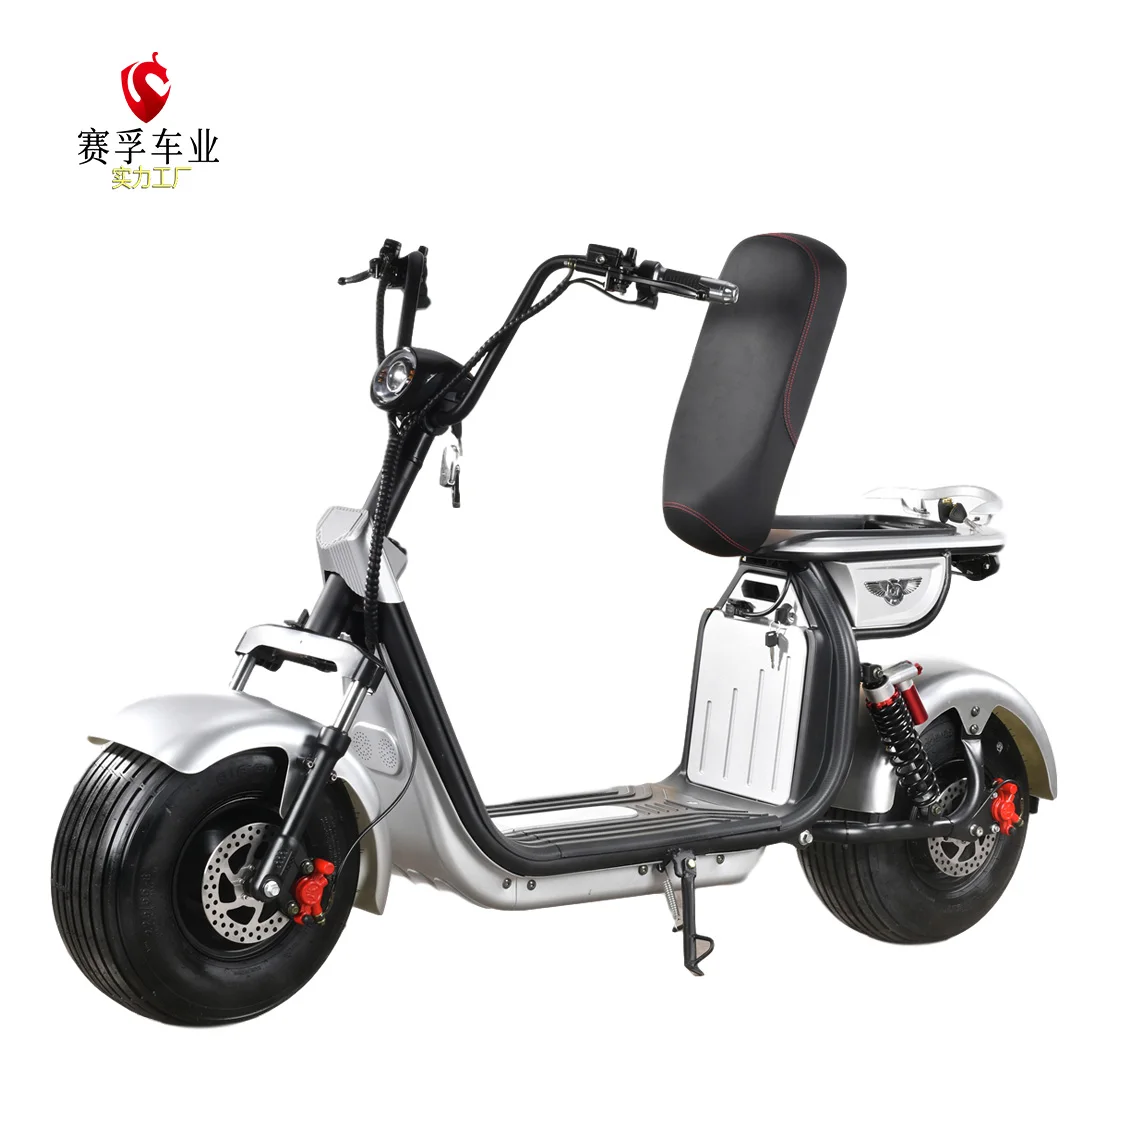 

Europe Warehouse To Door Buy Discount Lithium Battery Electric Scooter , 2 Wheel Self Balancing Electric Chariot, Black